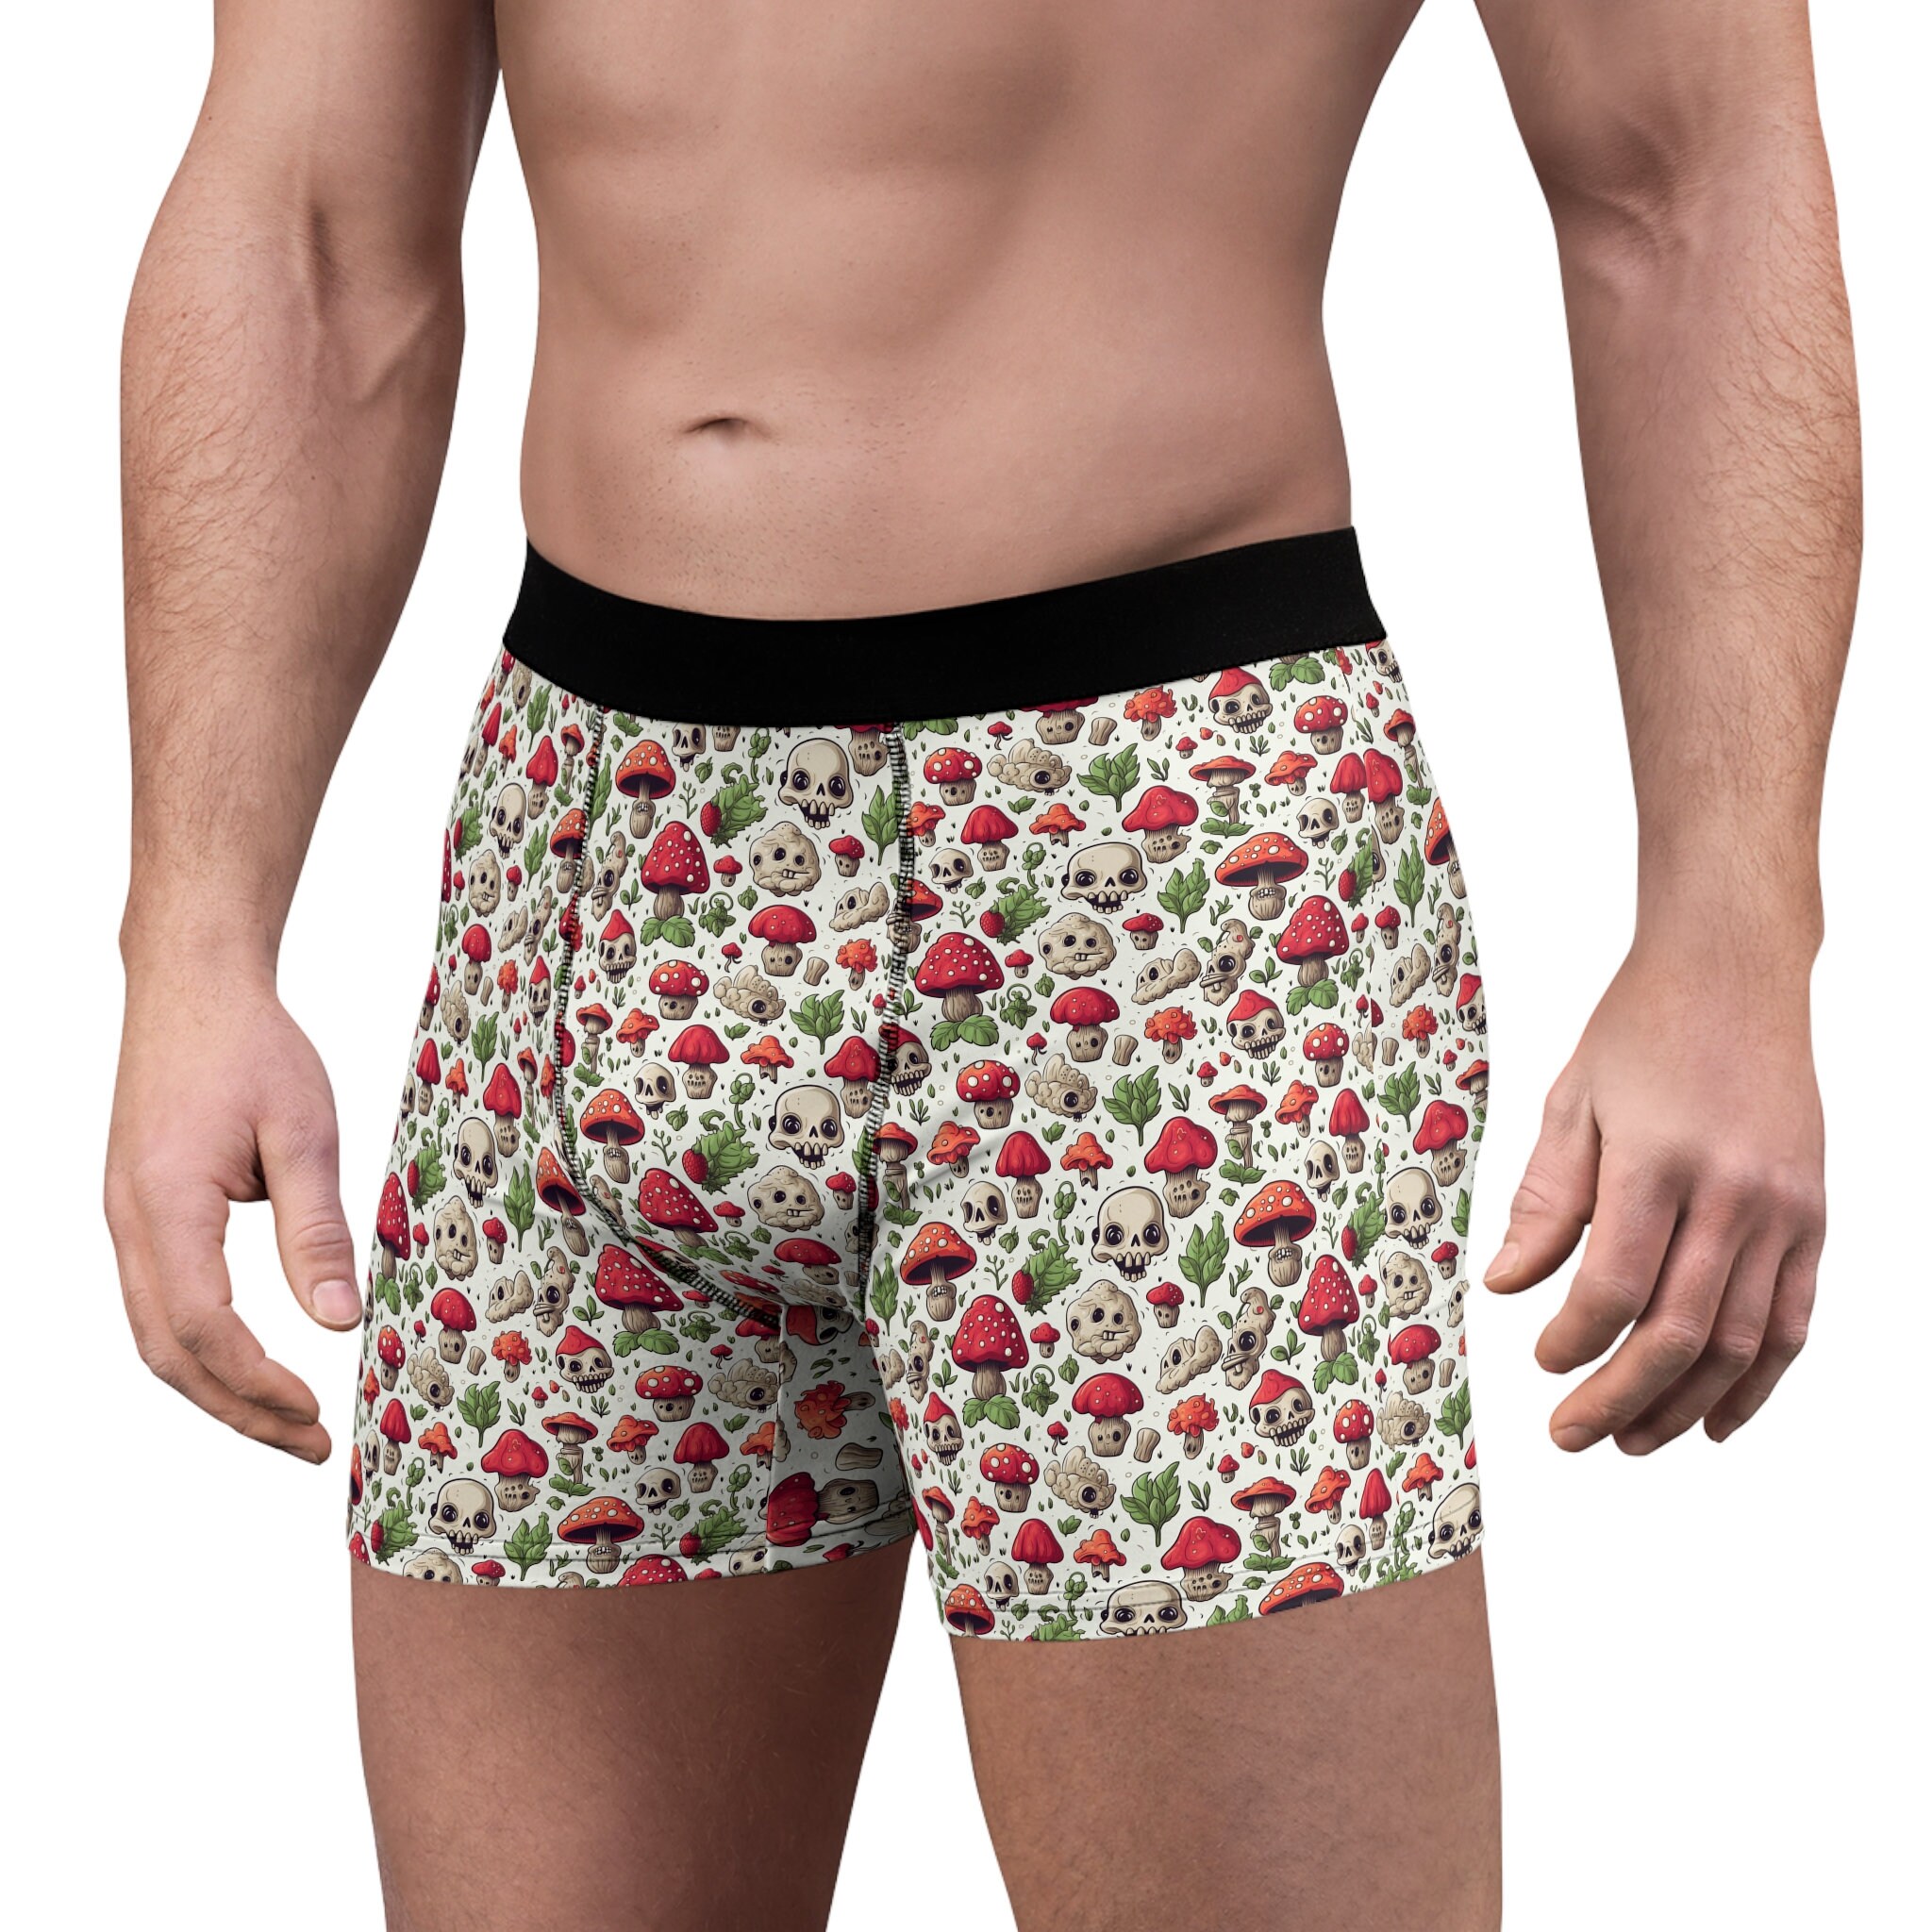 Buy Cute Boxer Shorts Online In India -  India